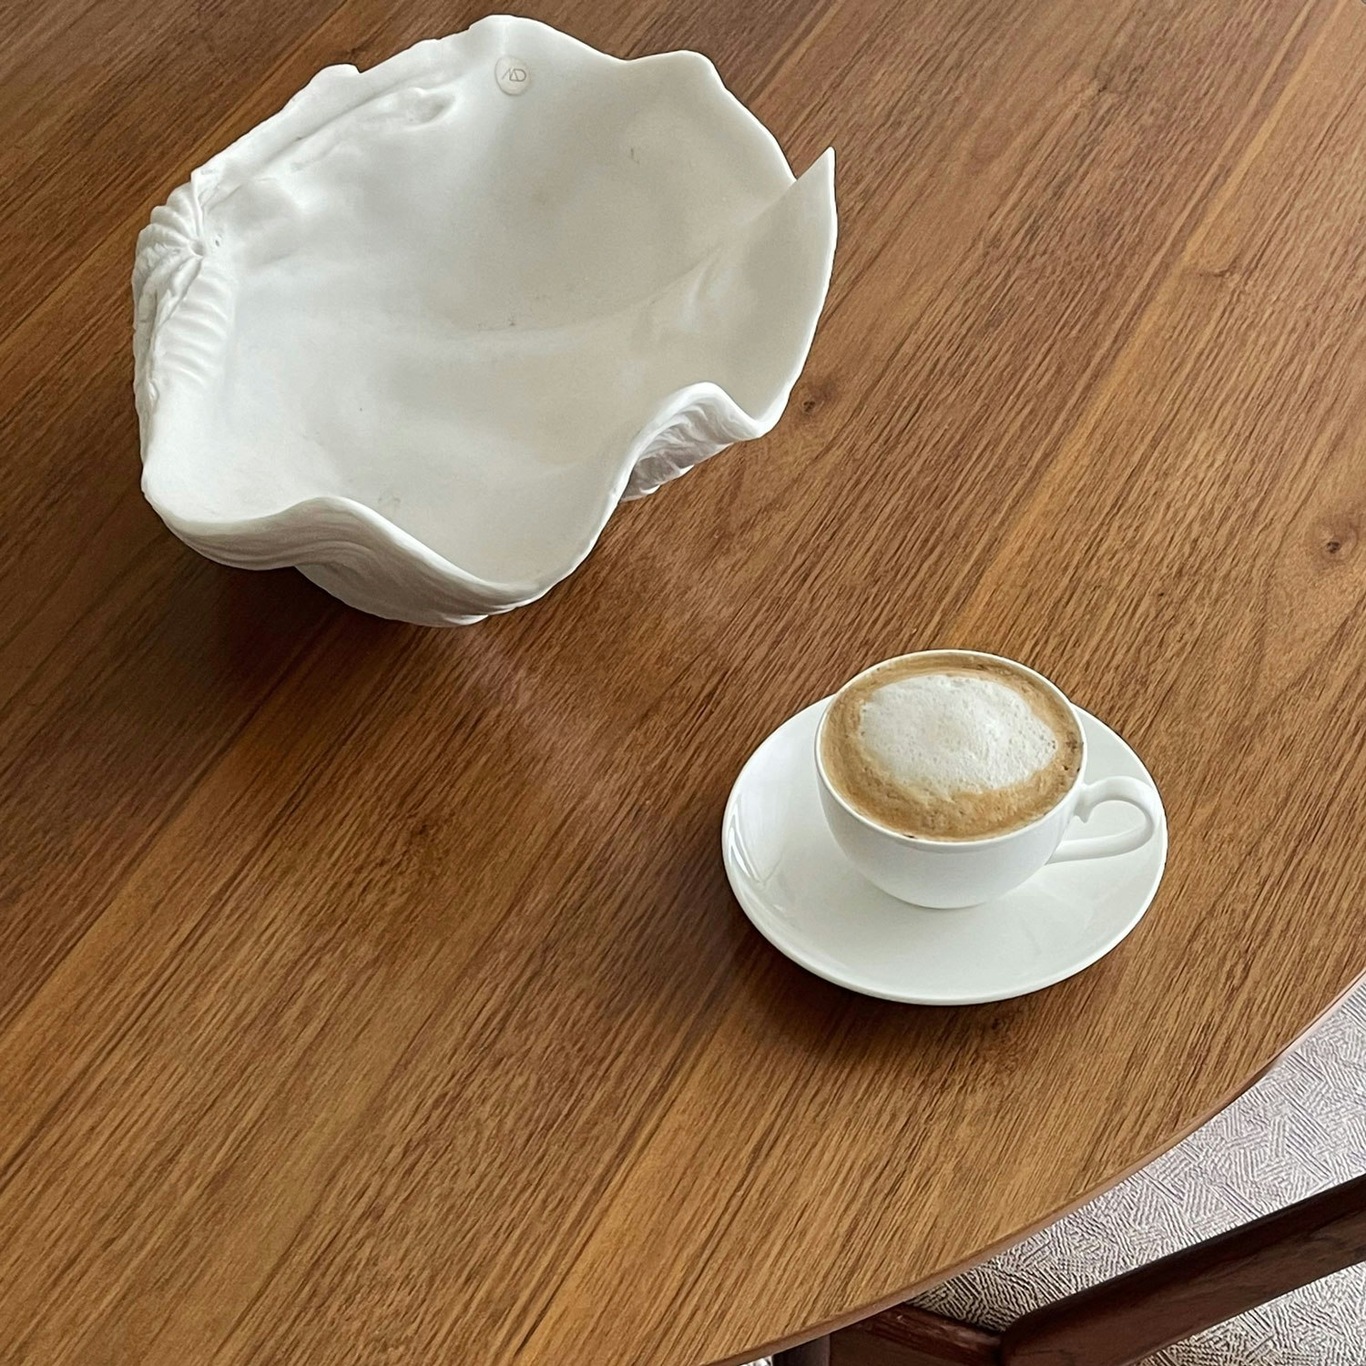 https://royaldesign.com/image/2/villeroy-boch-royal-white-coffee-cup-saucer-5?w=800&quality=80